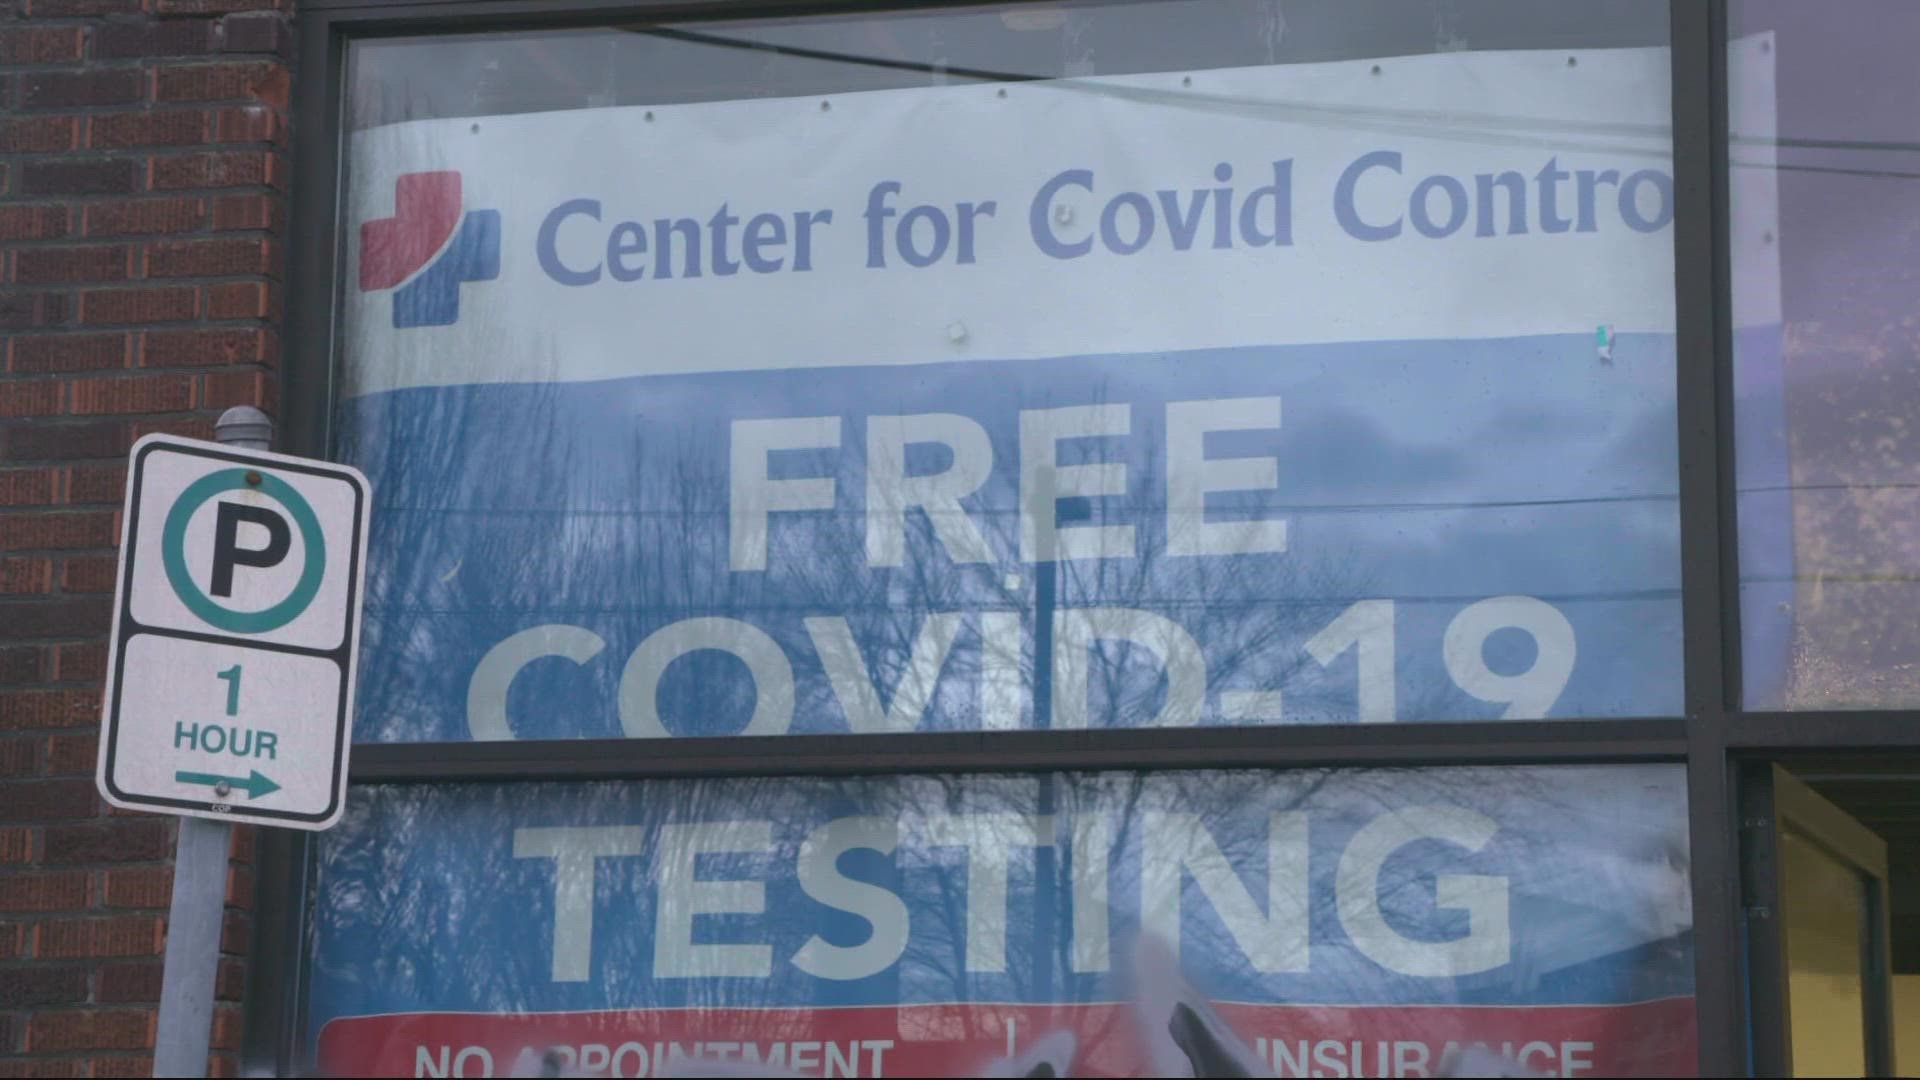 The Oregon Department of Justice is investigating a COVID testing company with sites in Portland after multiple complaints were filed.